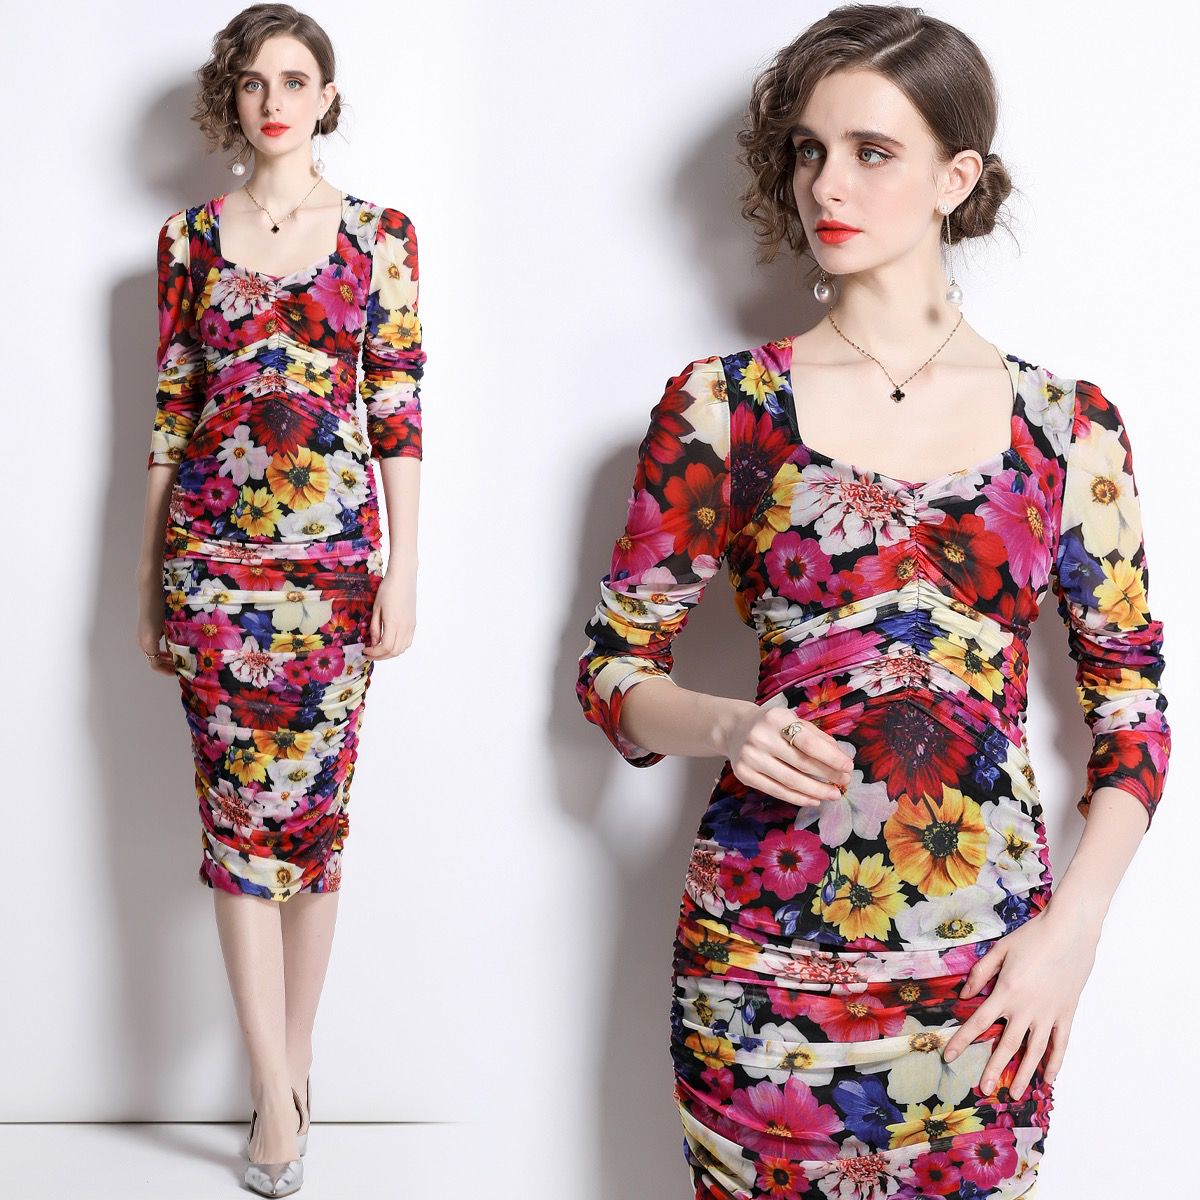 Ruched 3/4 sleeve dress in deep rich floral print